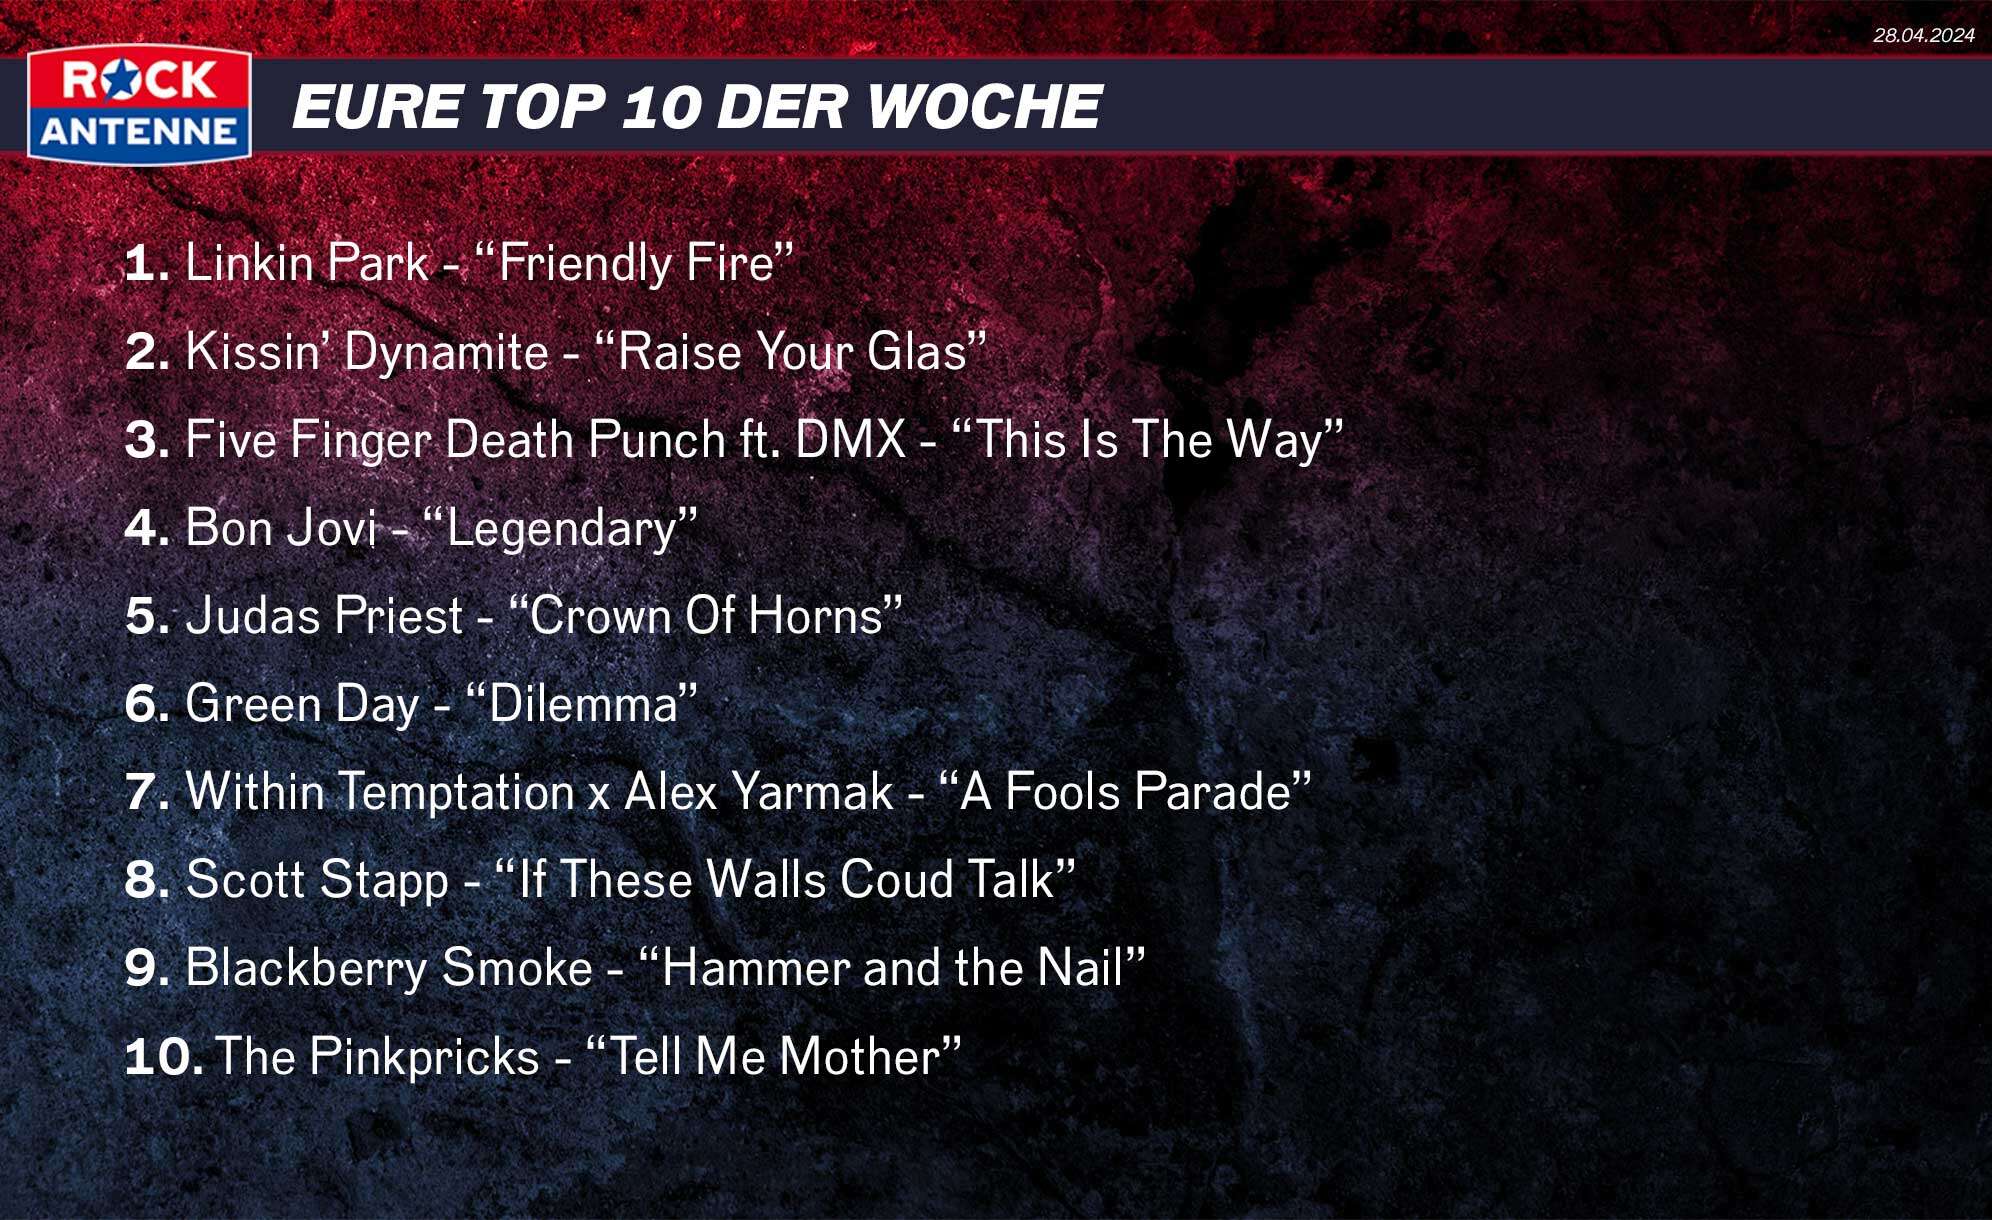 Die Top 10 der Woche vom 27.04.2024: 1. Linkin Park - “Friendly Fire” 2. Kissin’ Dynamite - “Raise Your Glas” 3. Five Finger Death Punch ft. DMX - “This Is The Way” 4. Bon Jovi - “Legendary” 5. Judas Priest - “Crown Of Horns” 6. Green Day - “Dilemma” 7. Within Temptation x Alex Yarmak - “A Fools Parade” 8. Scott Stapp - “If These Walls Coud Talk” 9. Blackberry Smoke - “Hammer and the Nail” 10. The Pinkpricks - “Tell Me Mother”